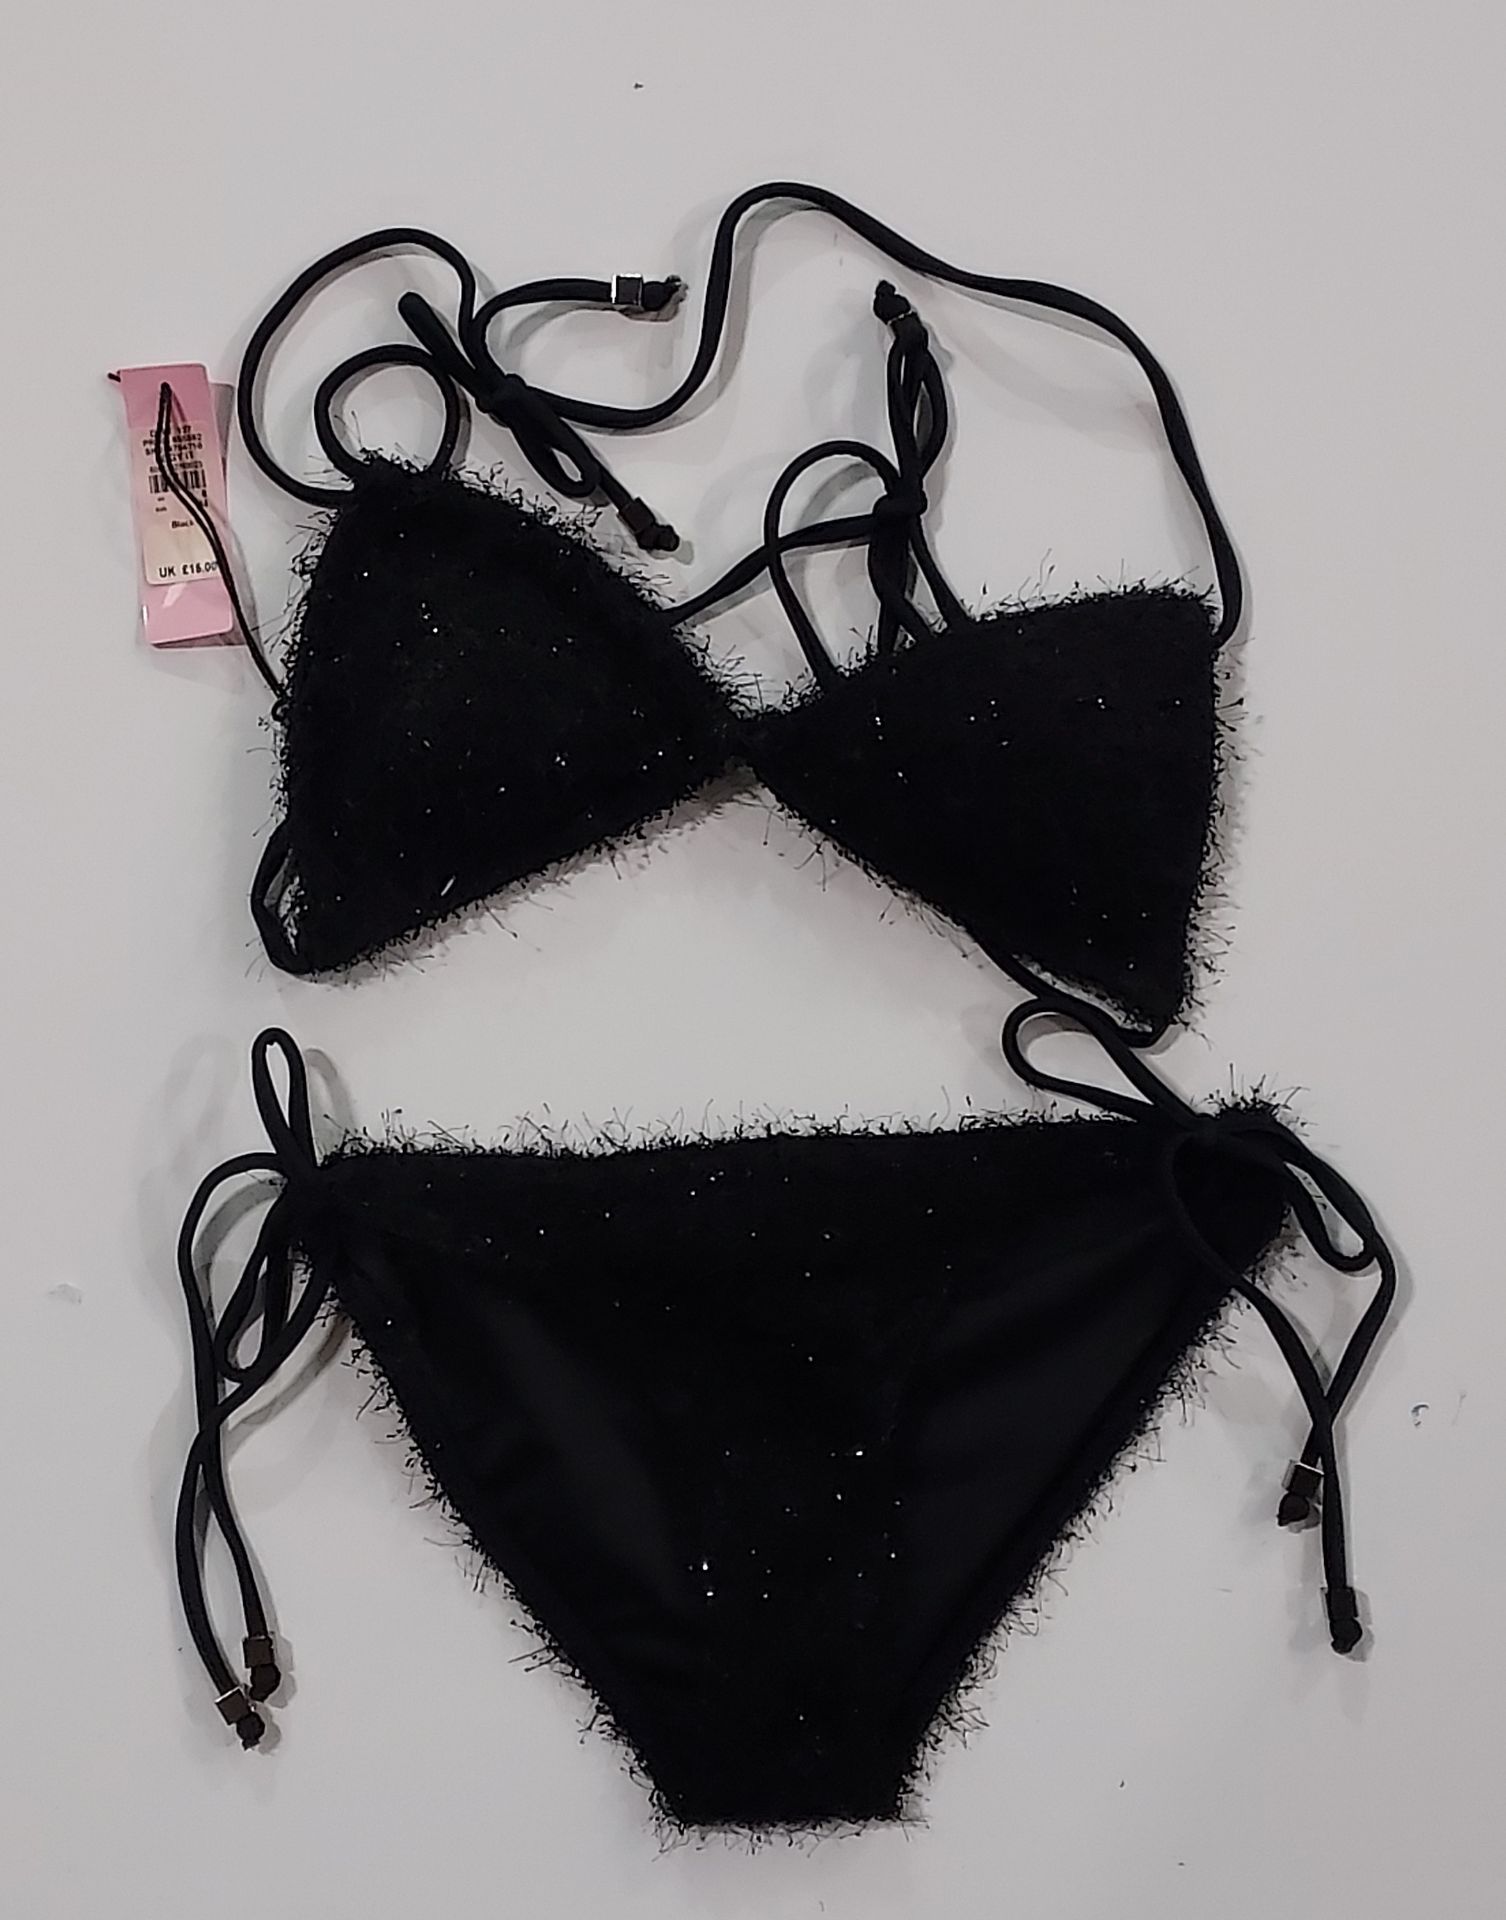 100 X BRAND NEW RIVER ISLAND EDGY IT BIKINI SET - ALL IN BLACK - IN MIXED SIZES TO INCLUDE UK 8 /